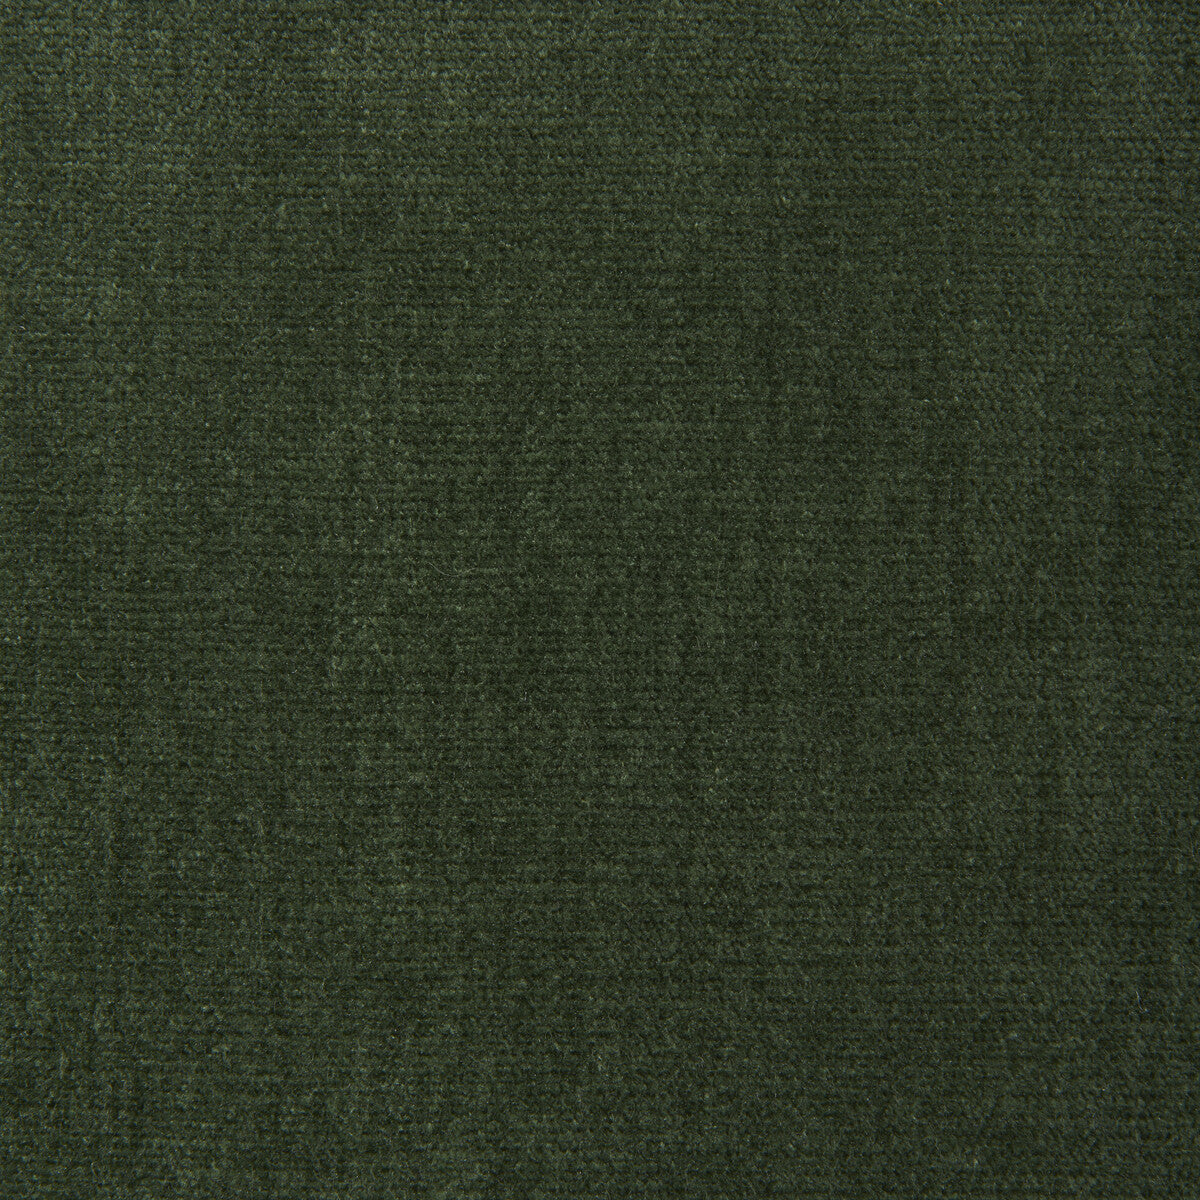 Kravet Smart fabric in 36076-33 color - pattern 36076.33.0 - by Kravet Smart in the Sumptuous Chenille II collection